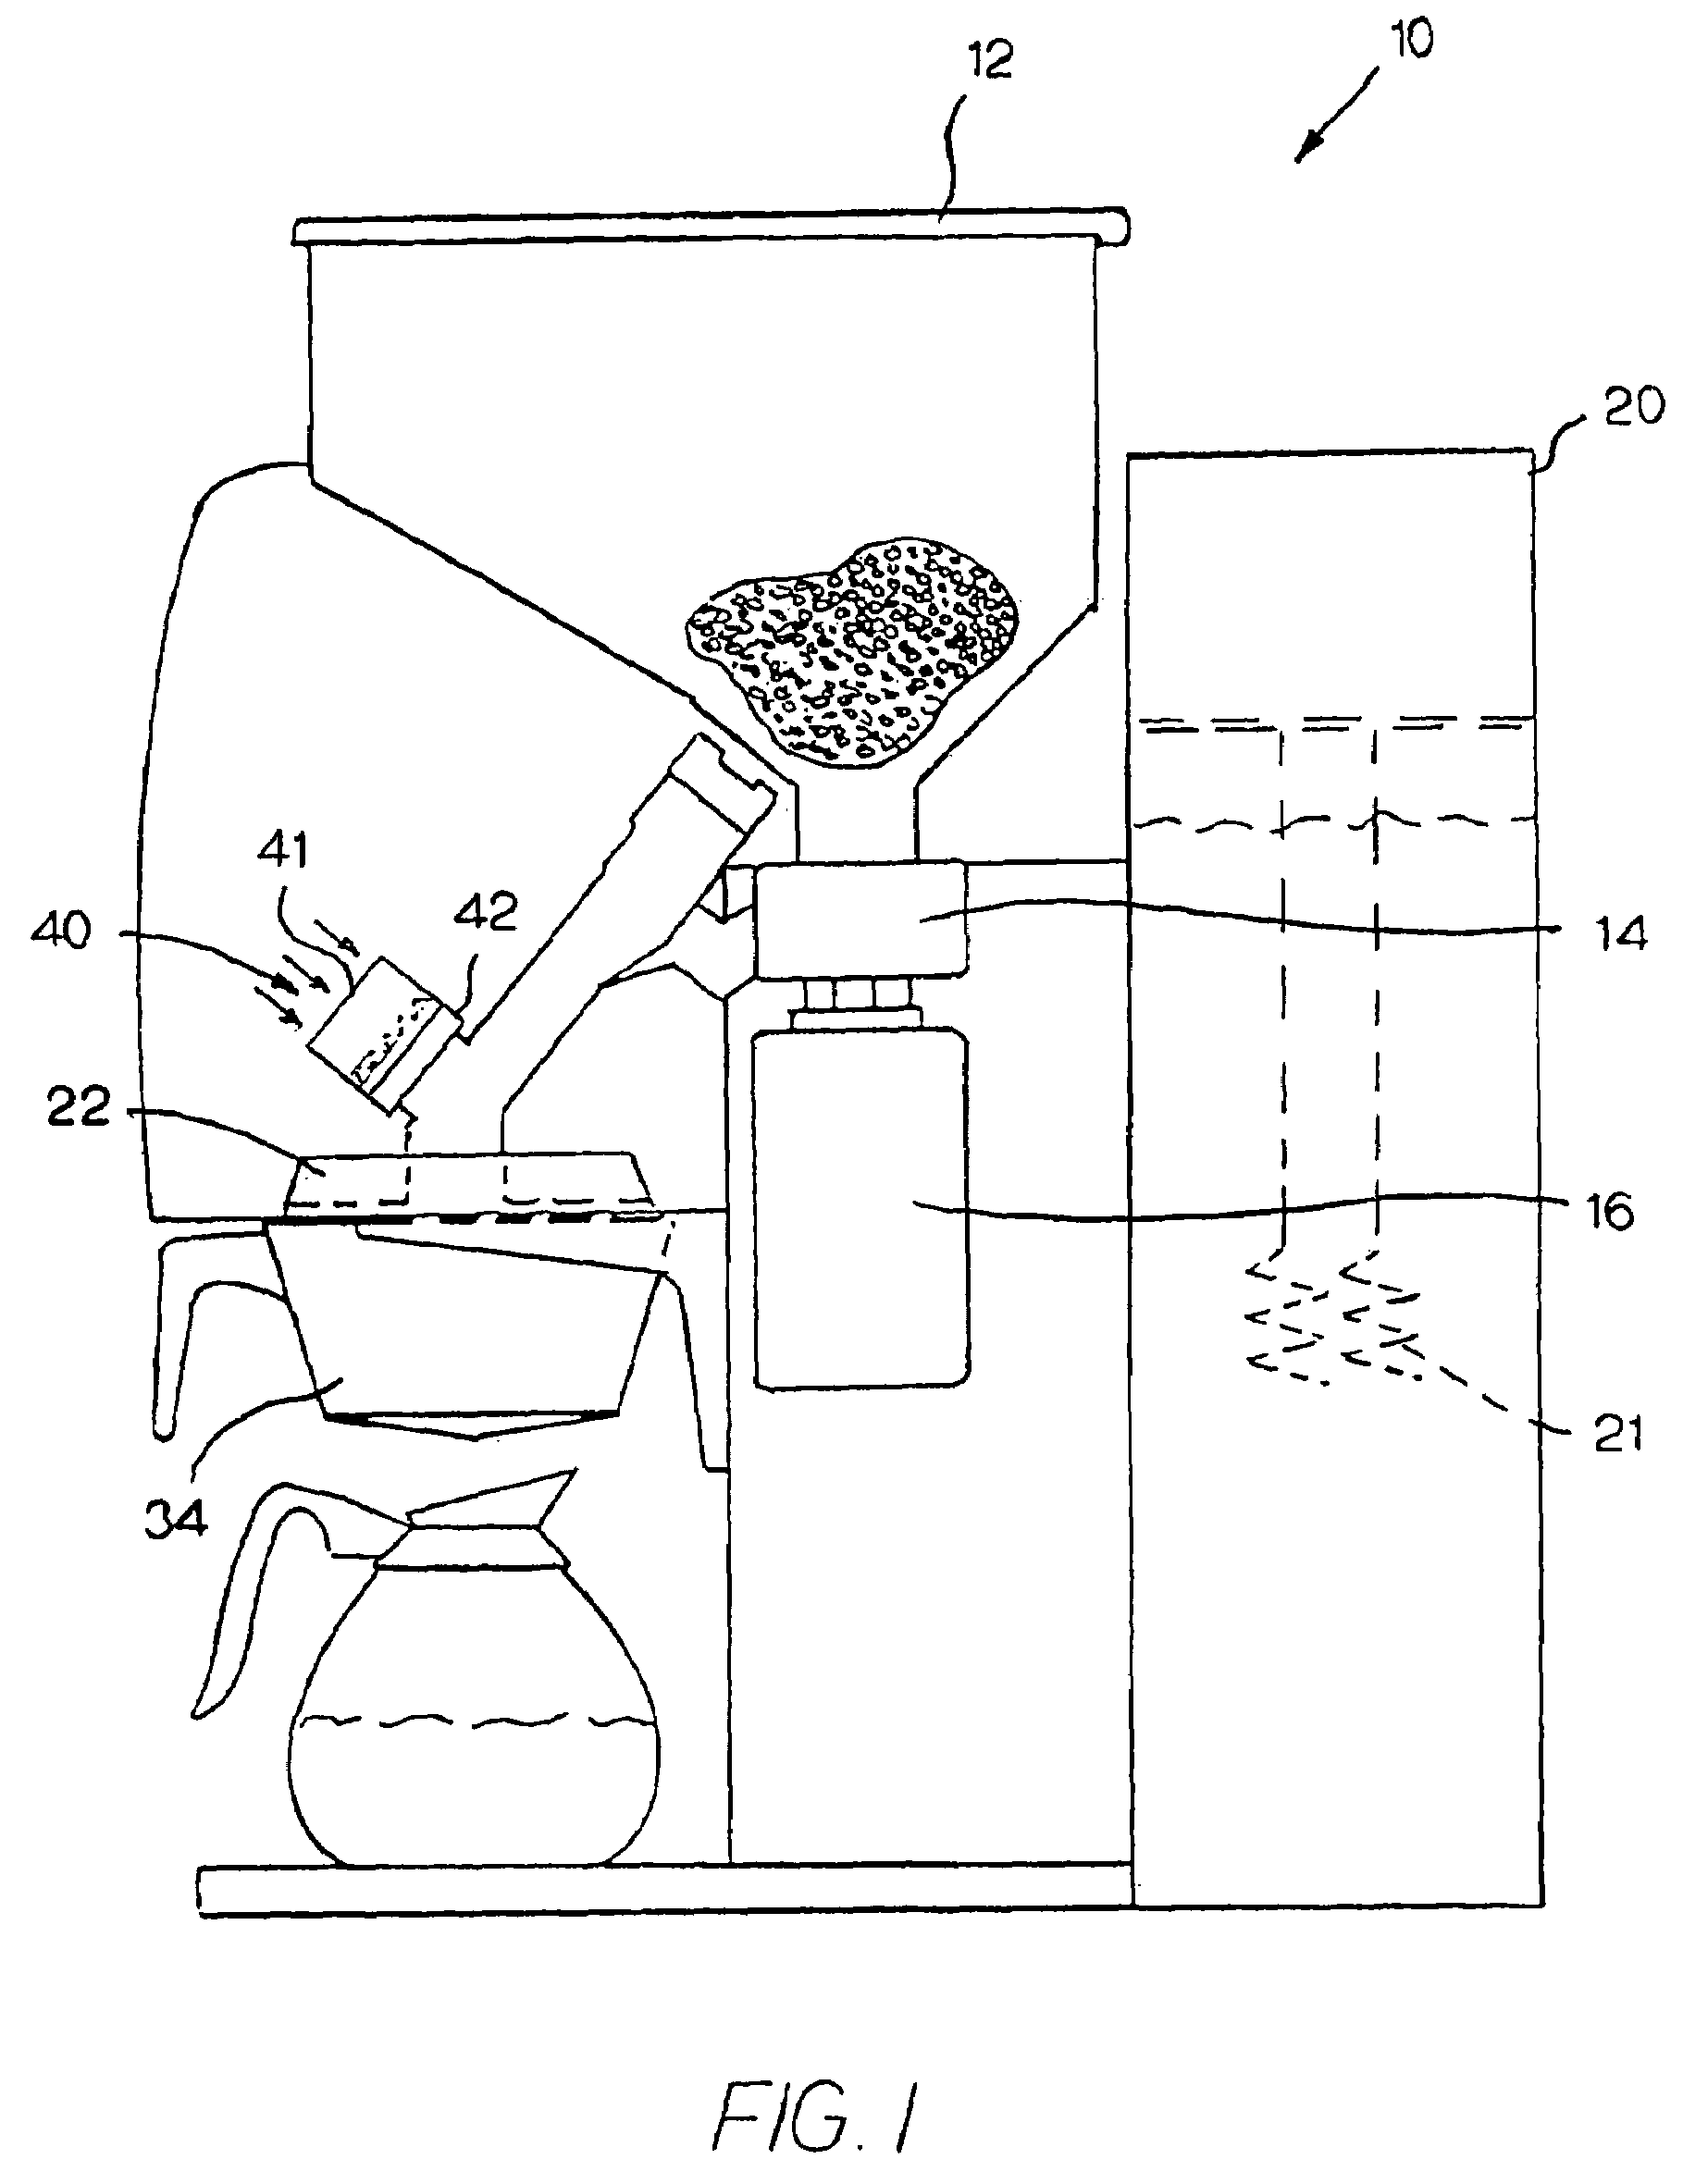 Combination grinder and brewer